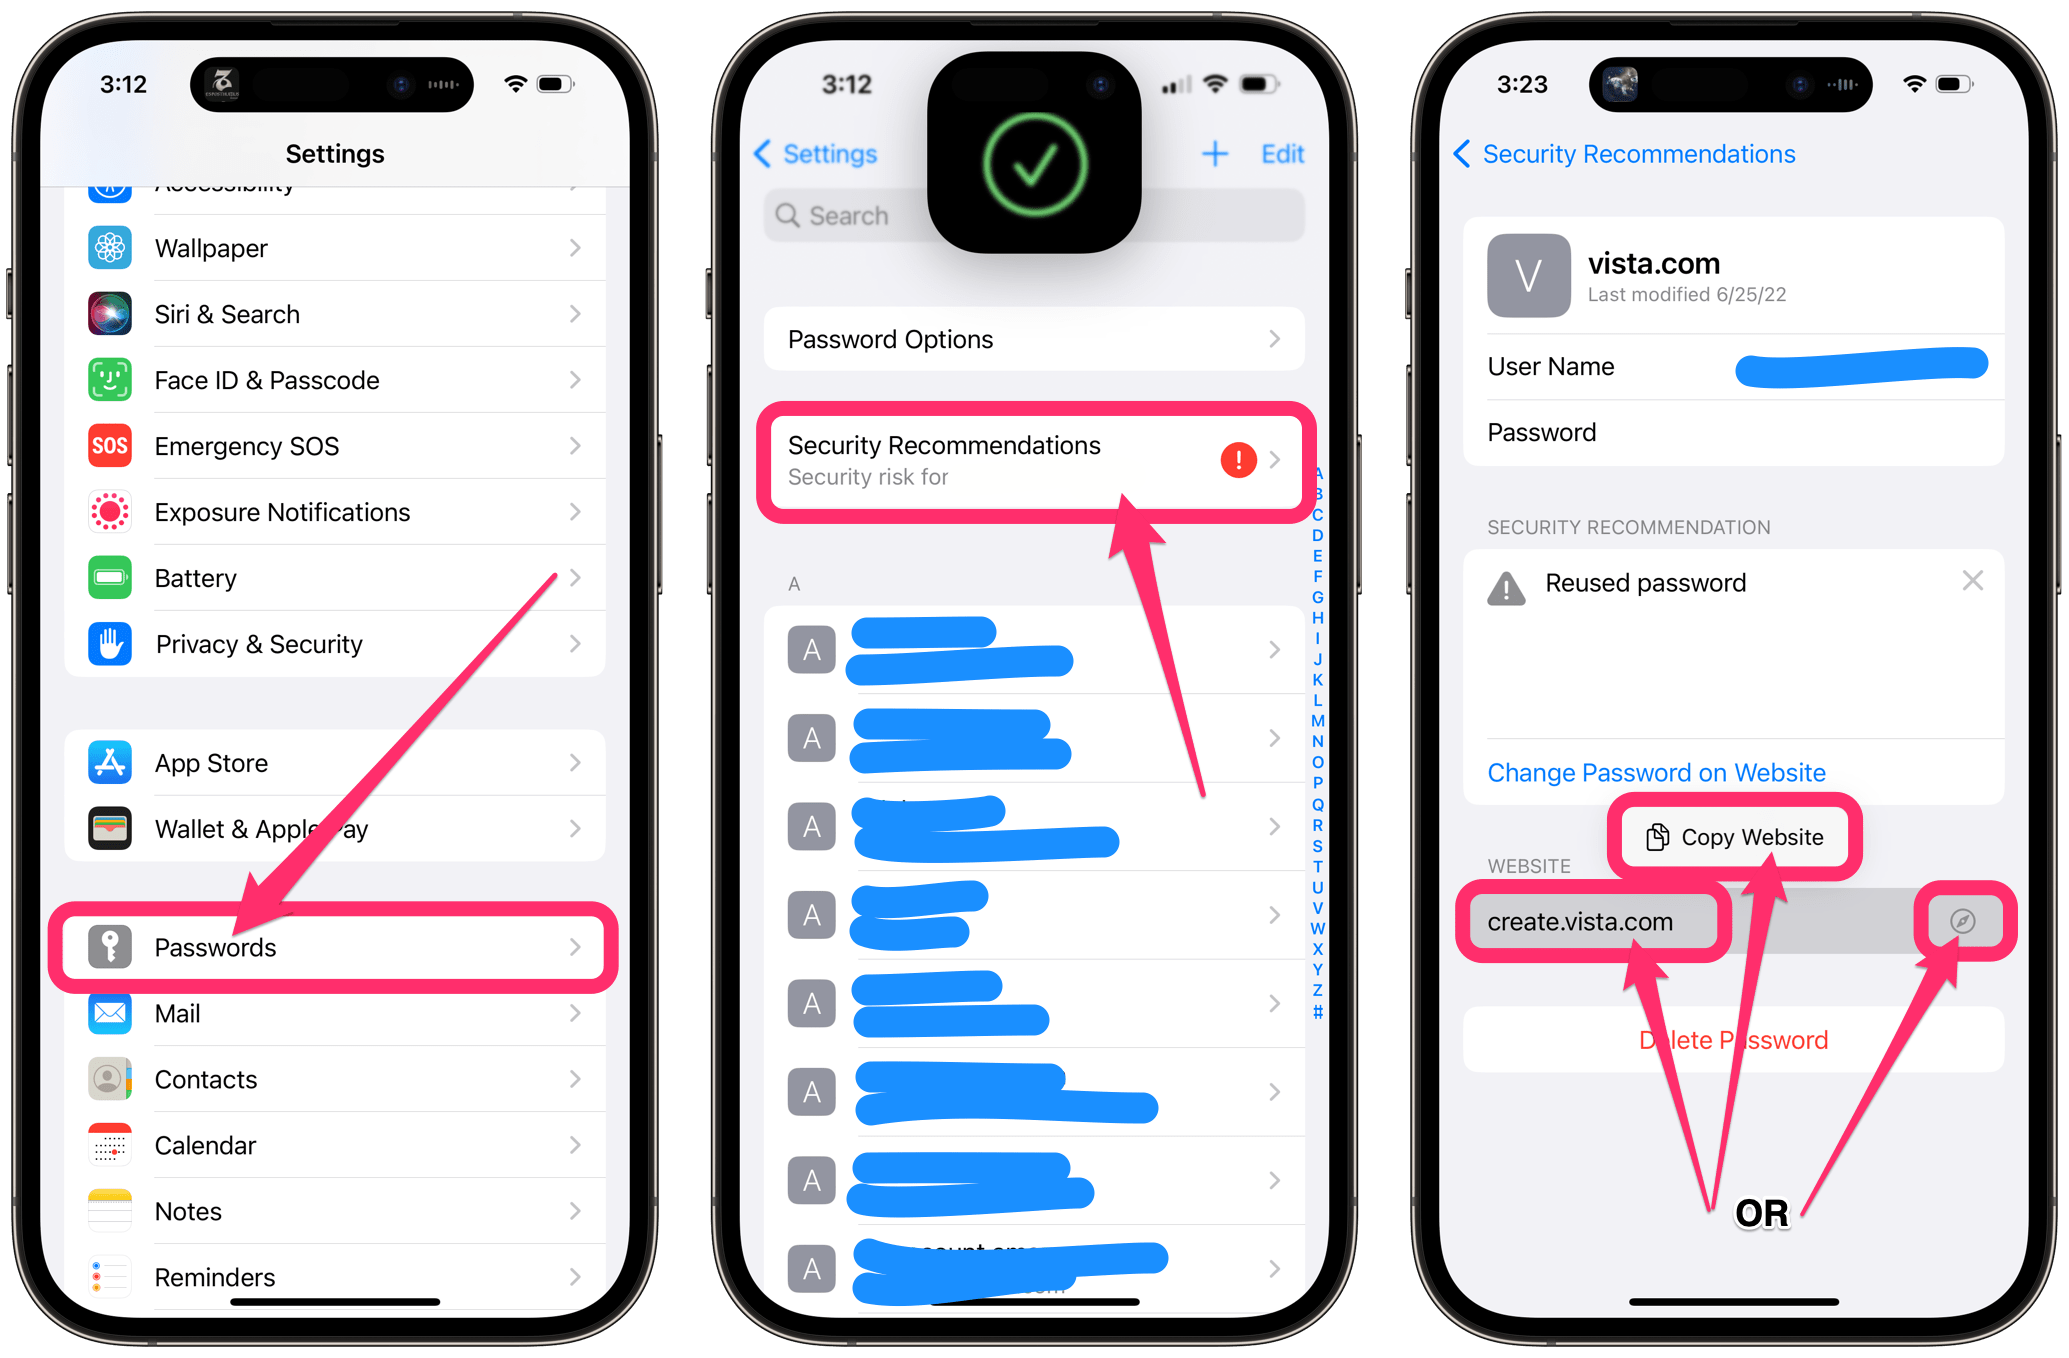 passwords in settings on iPhone. security recommendations